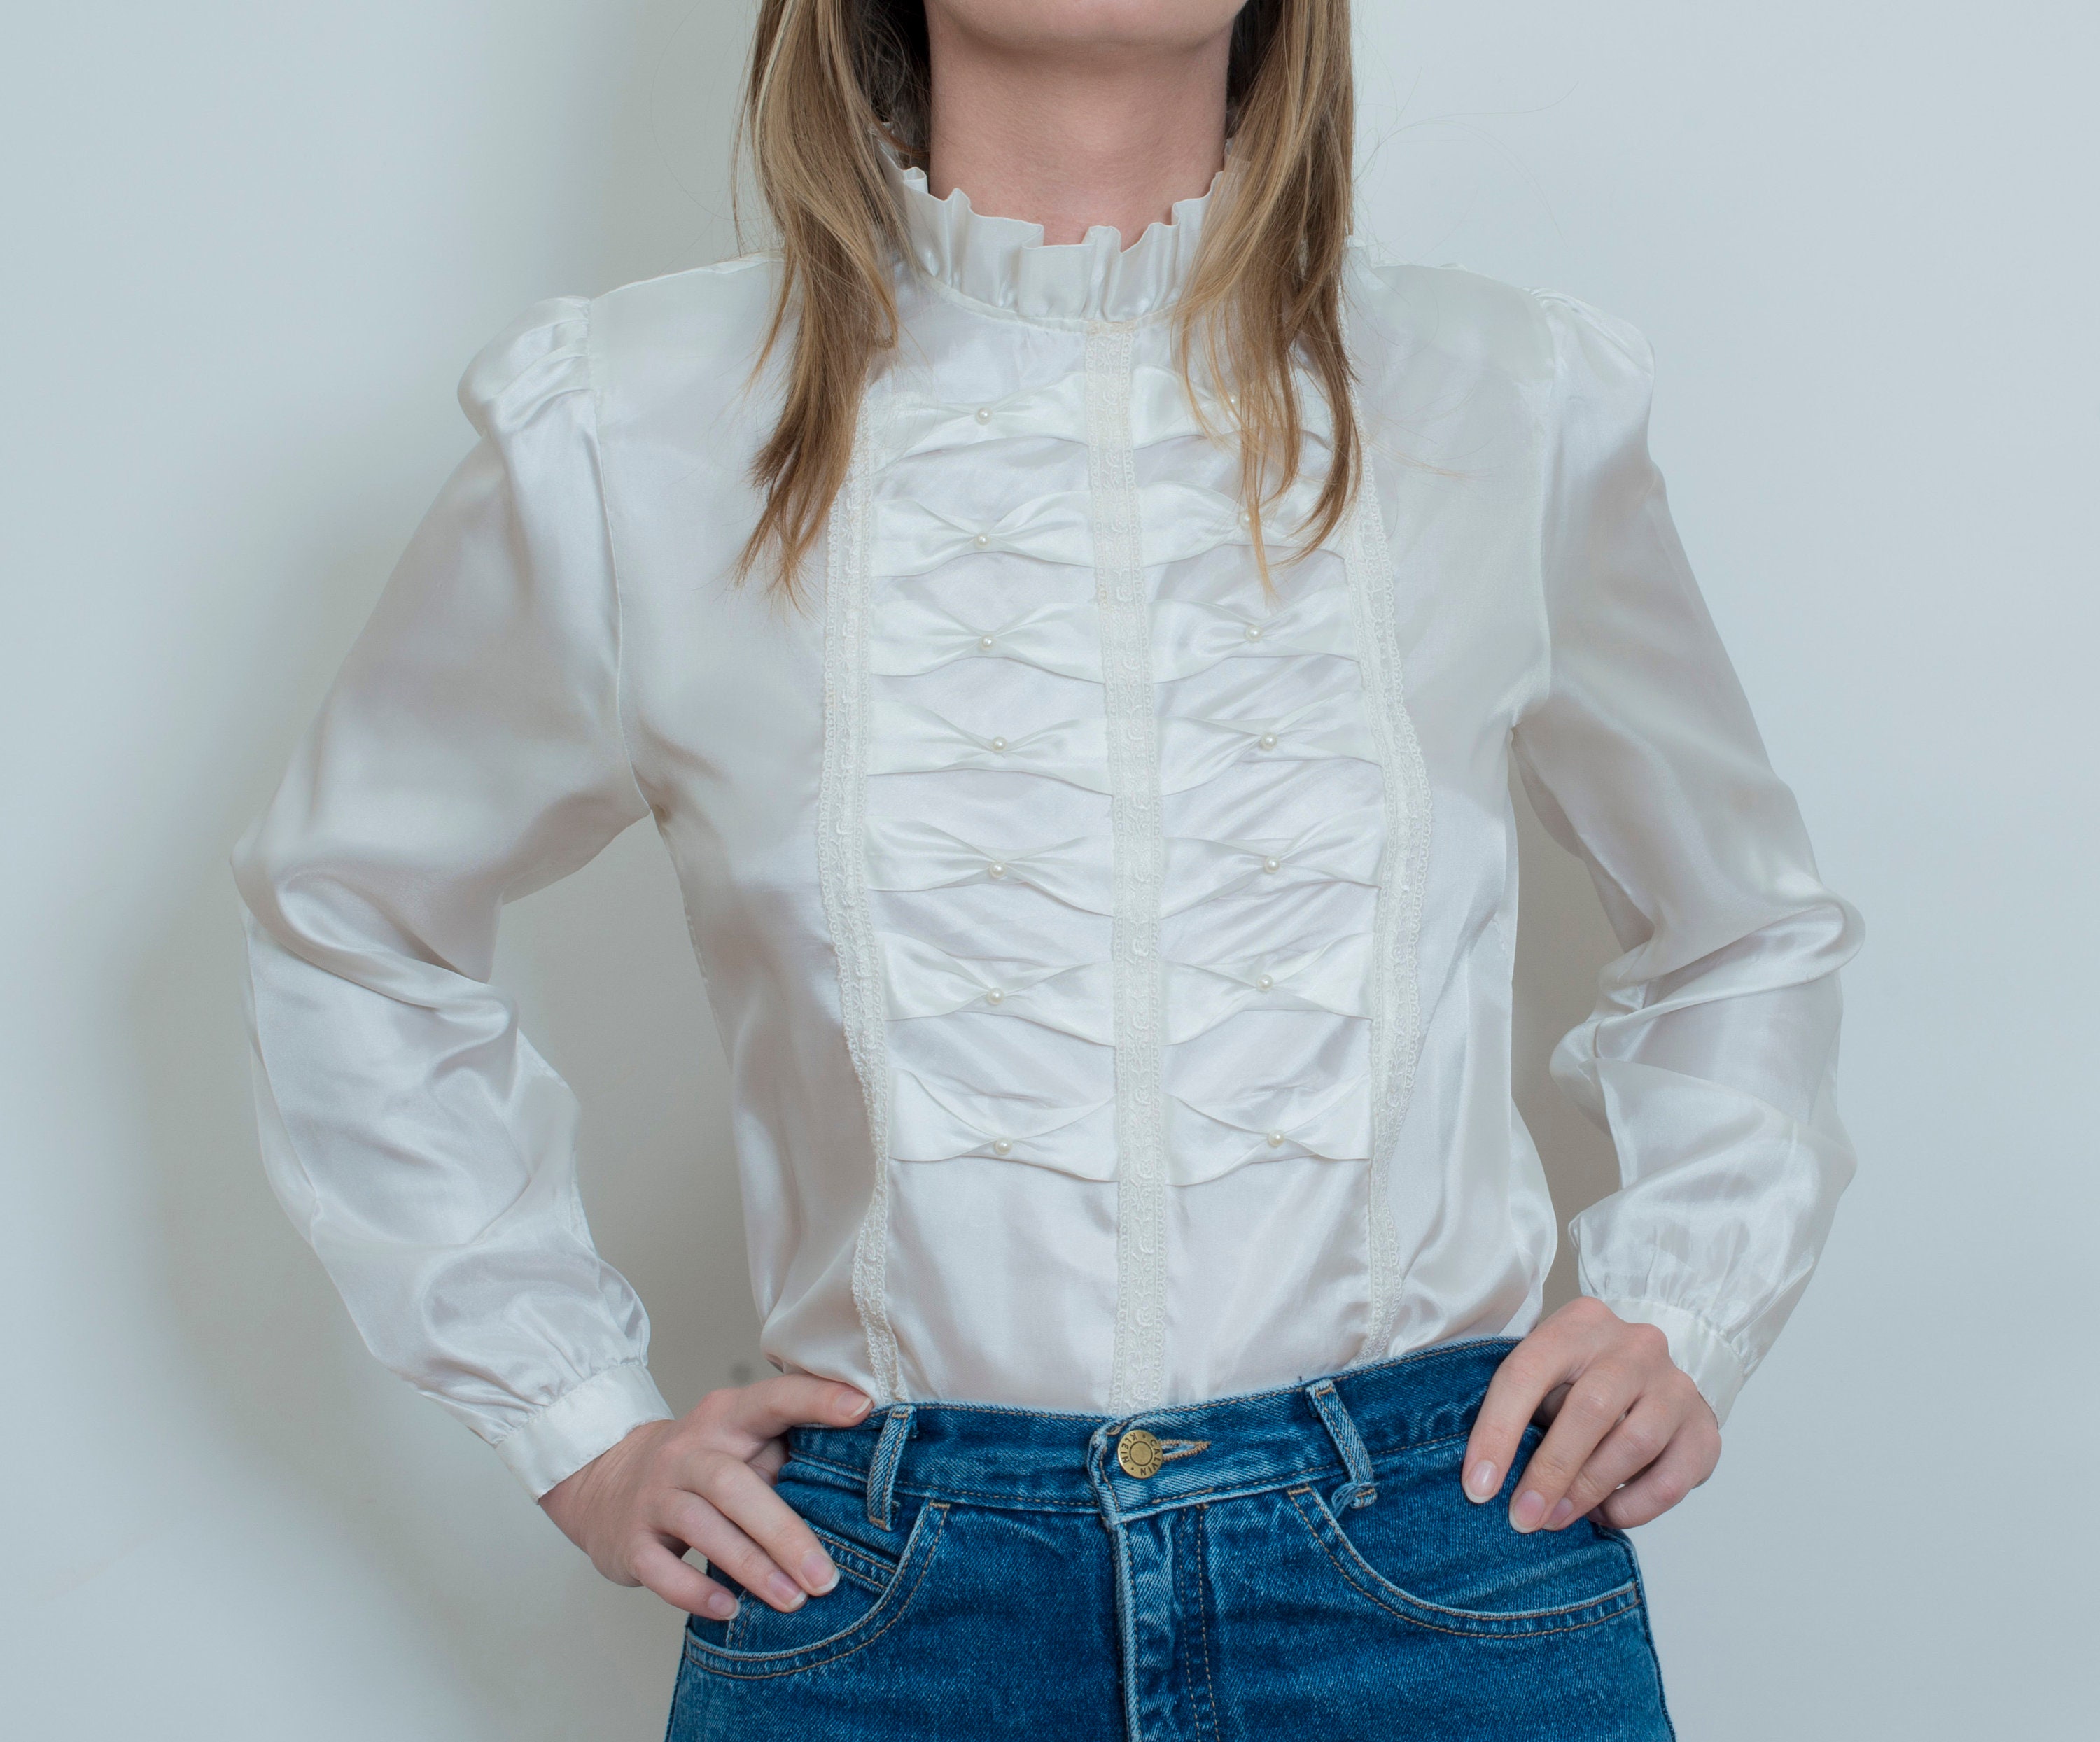 70s white ruffle blouse high neck victorian style blouse | Etsy